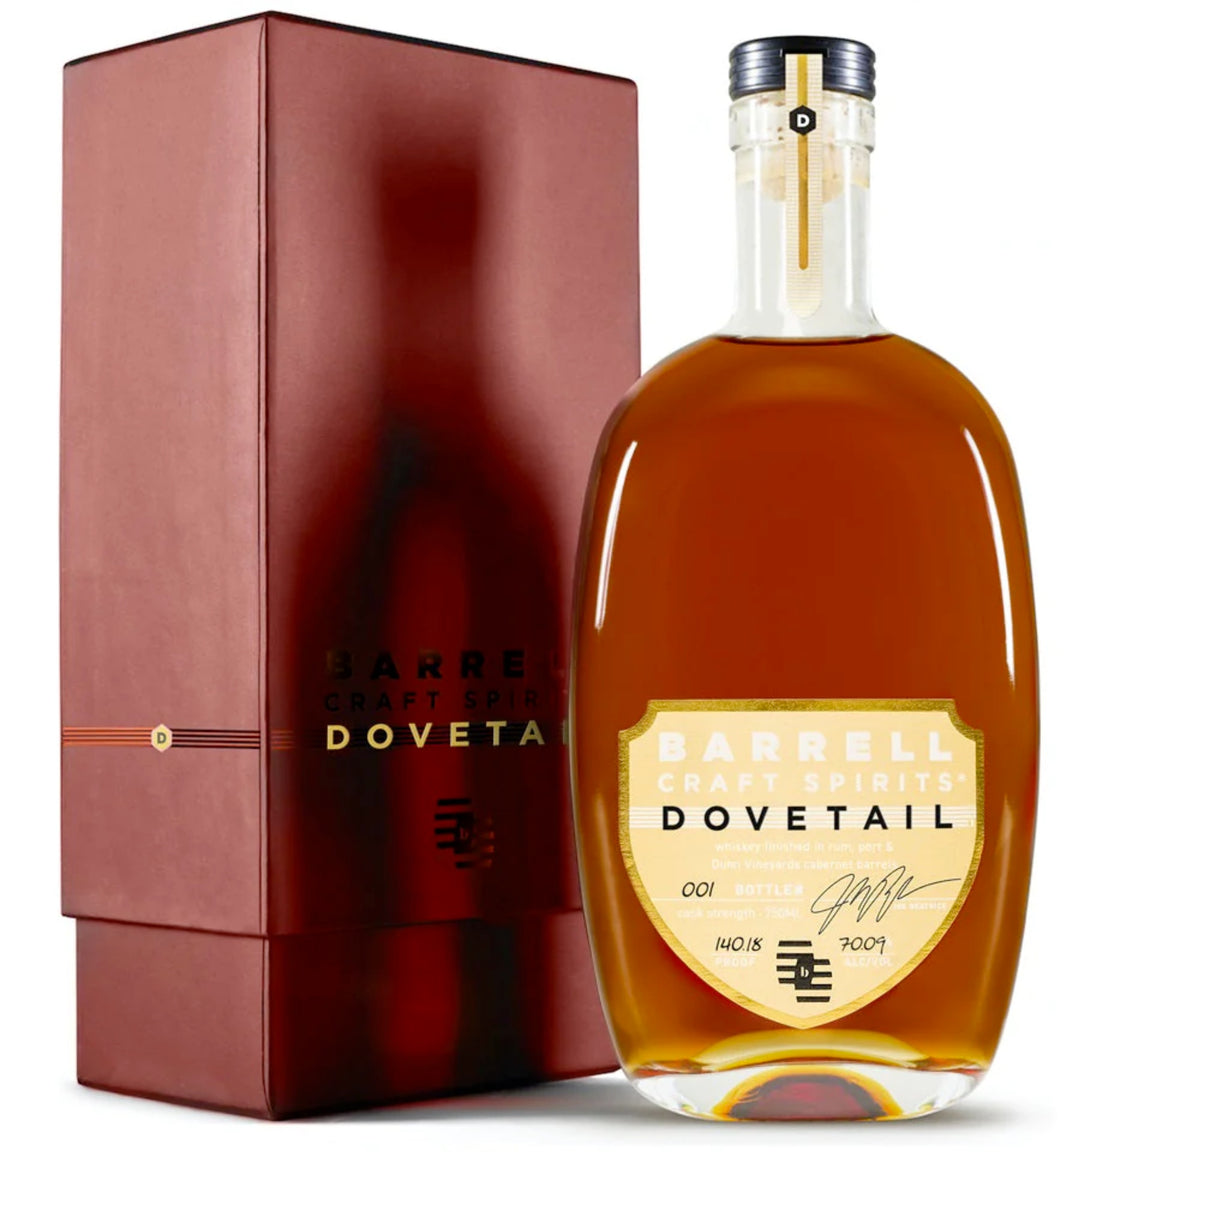 Barrell Craft Spirits Limited Edition Gold Label Dovetail Whiskey - De Wine Spot | DWS - Drams/Whiskey, Wines, Sake